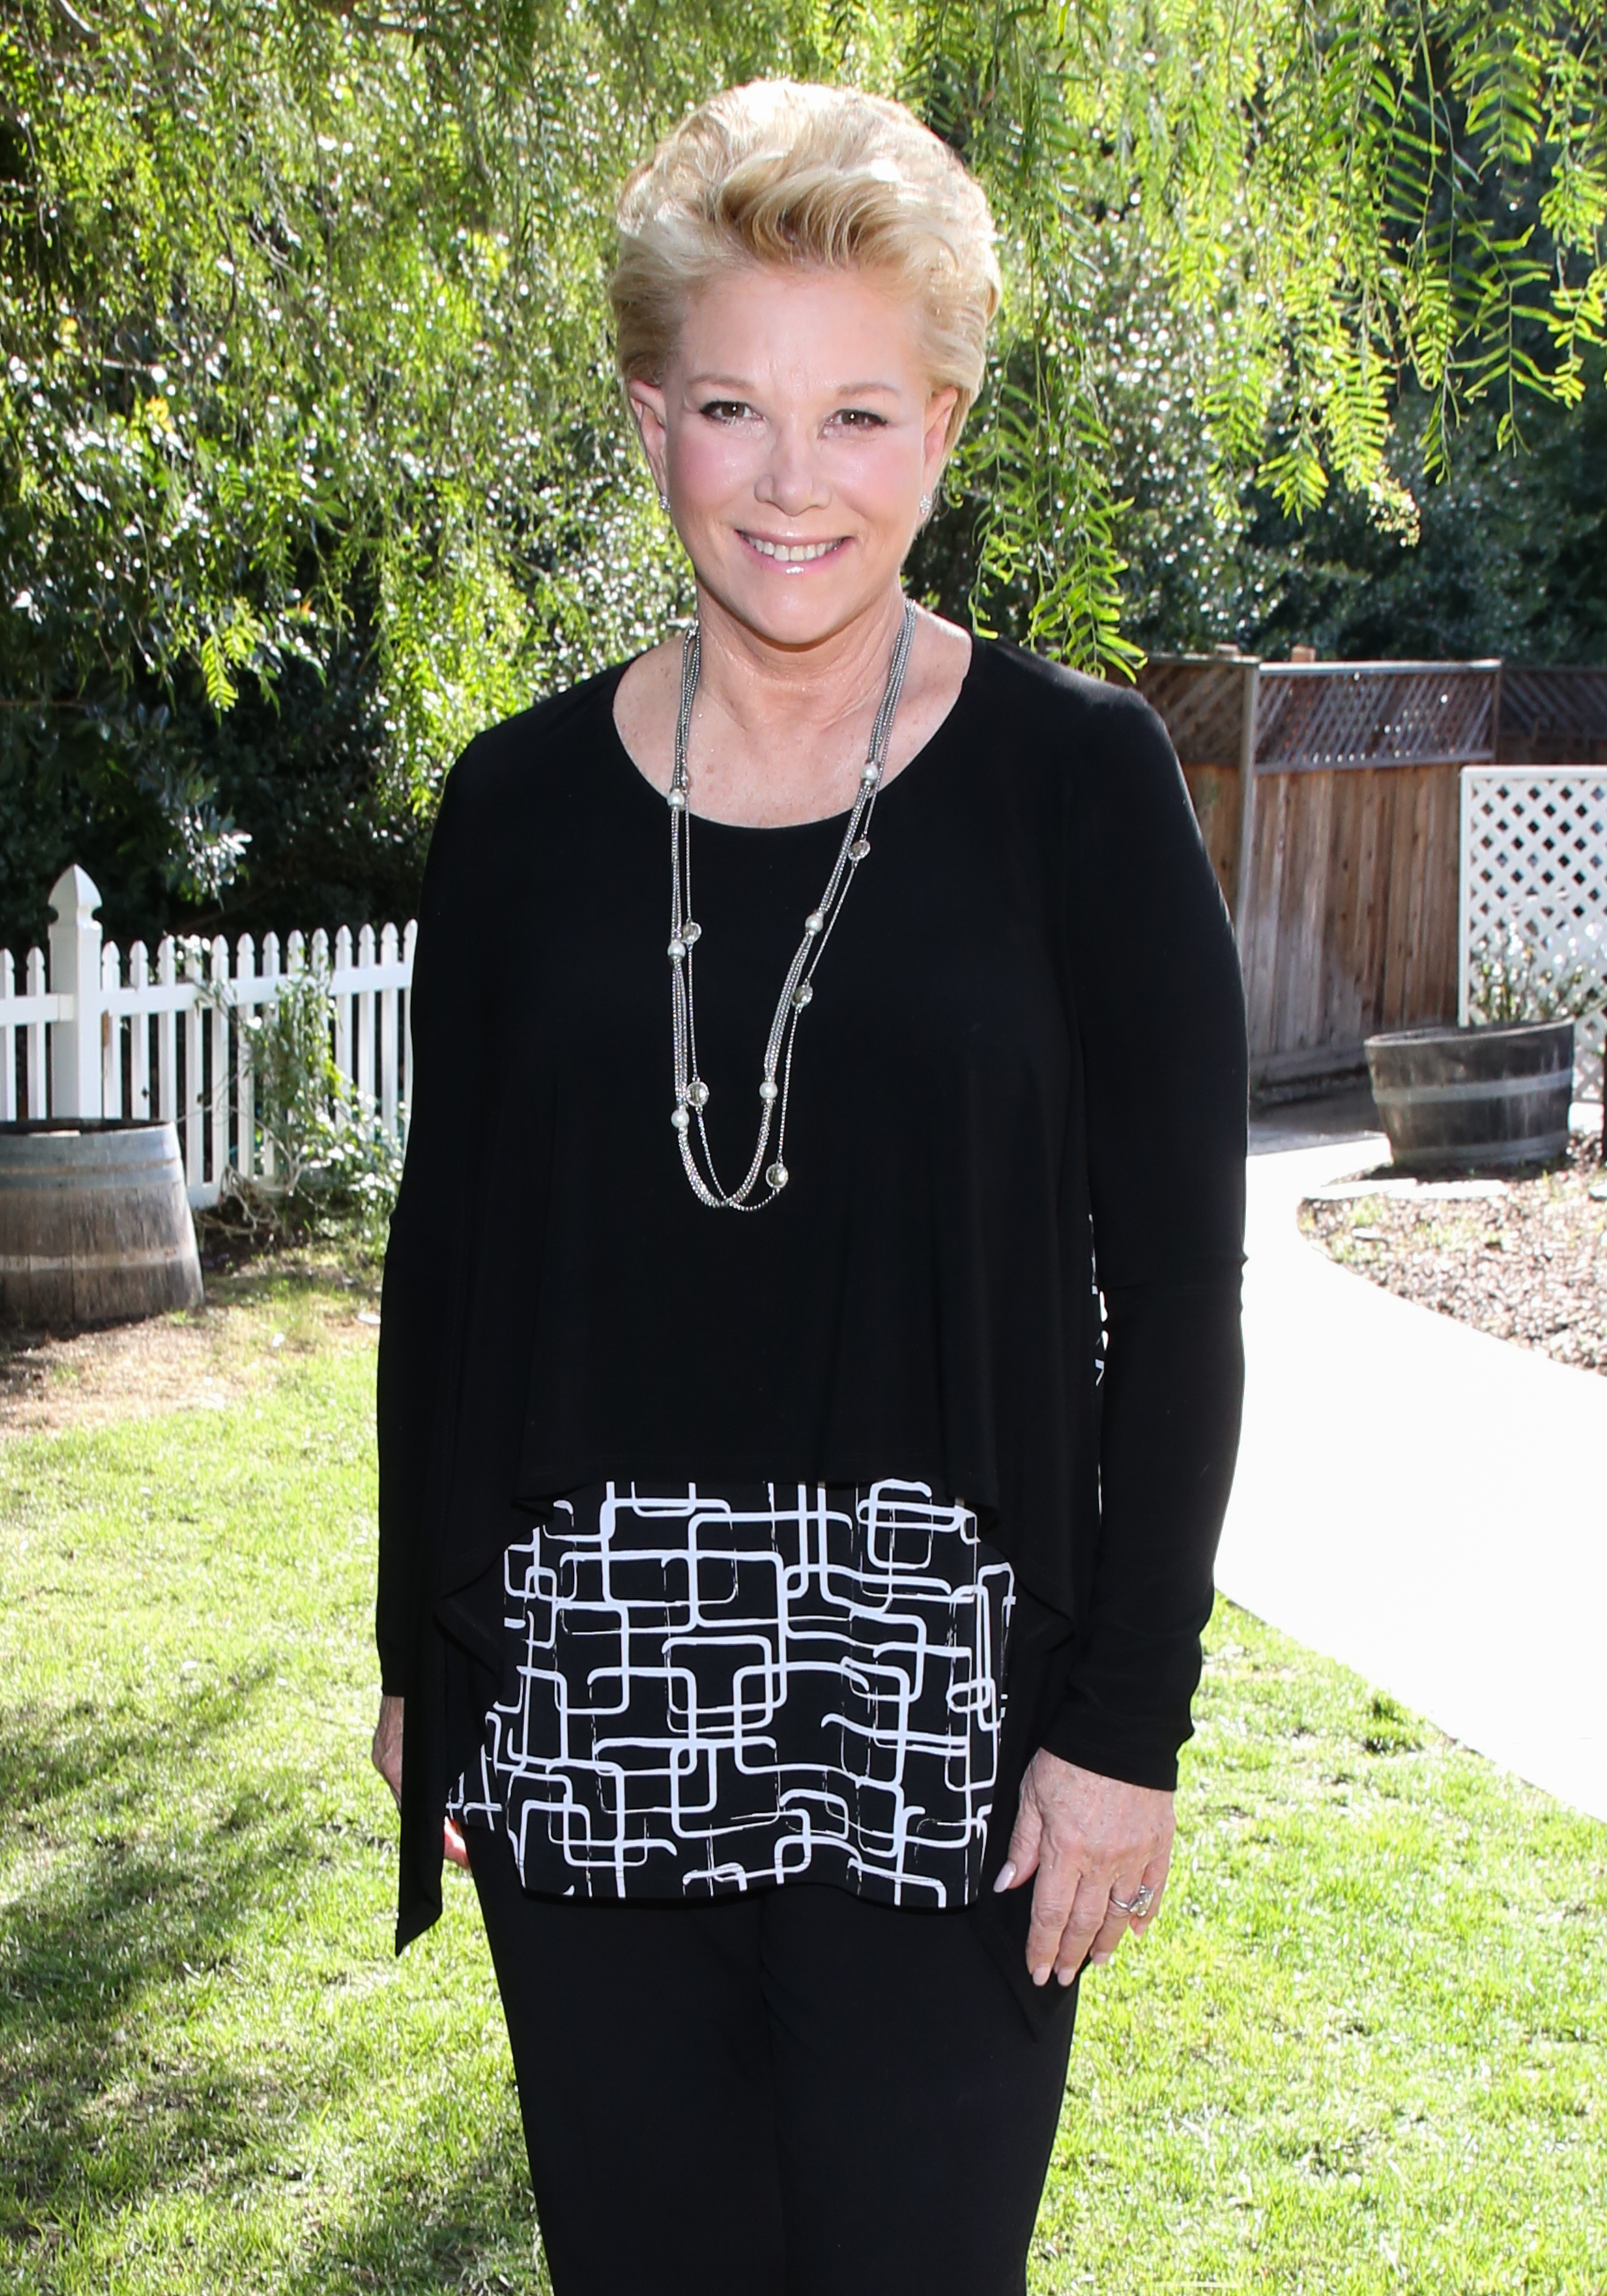 Joan Lunden visits Hallmark Channel's "Home & Family" at Universal Studios Hollywood in Universal City, California on February 26, 2020. | Source: Getty Images